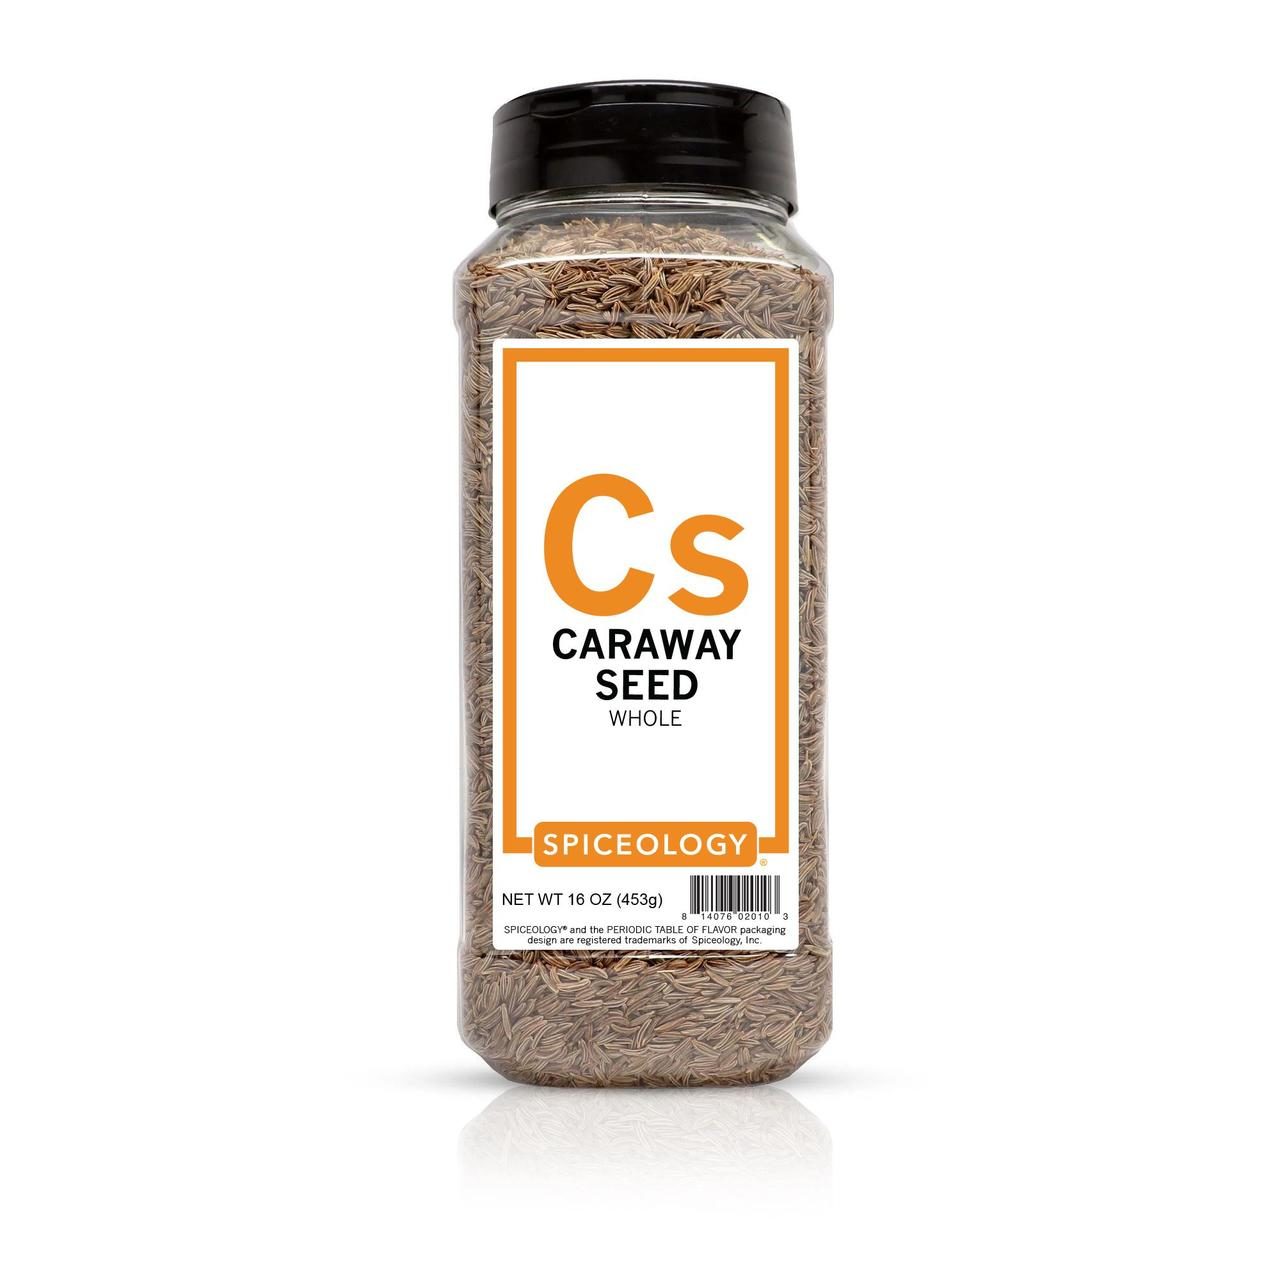 https://spiceology.com/wp-content/uploads/2020/08/caraway-seed-whole__86416.1597095125.1280.1280-1280x1280.jpg